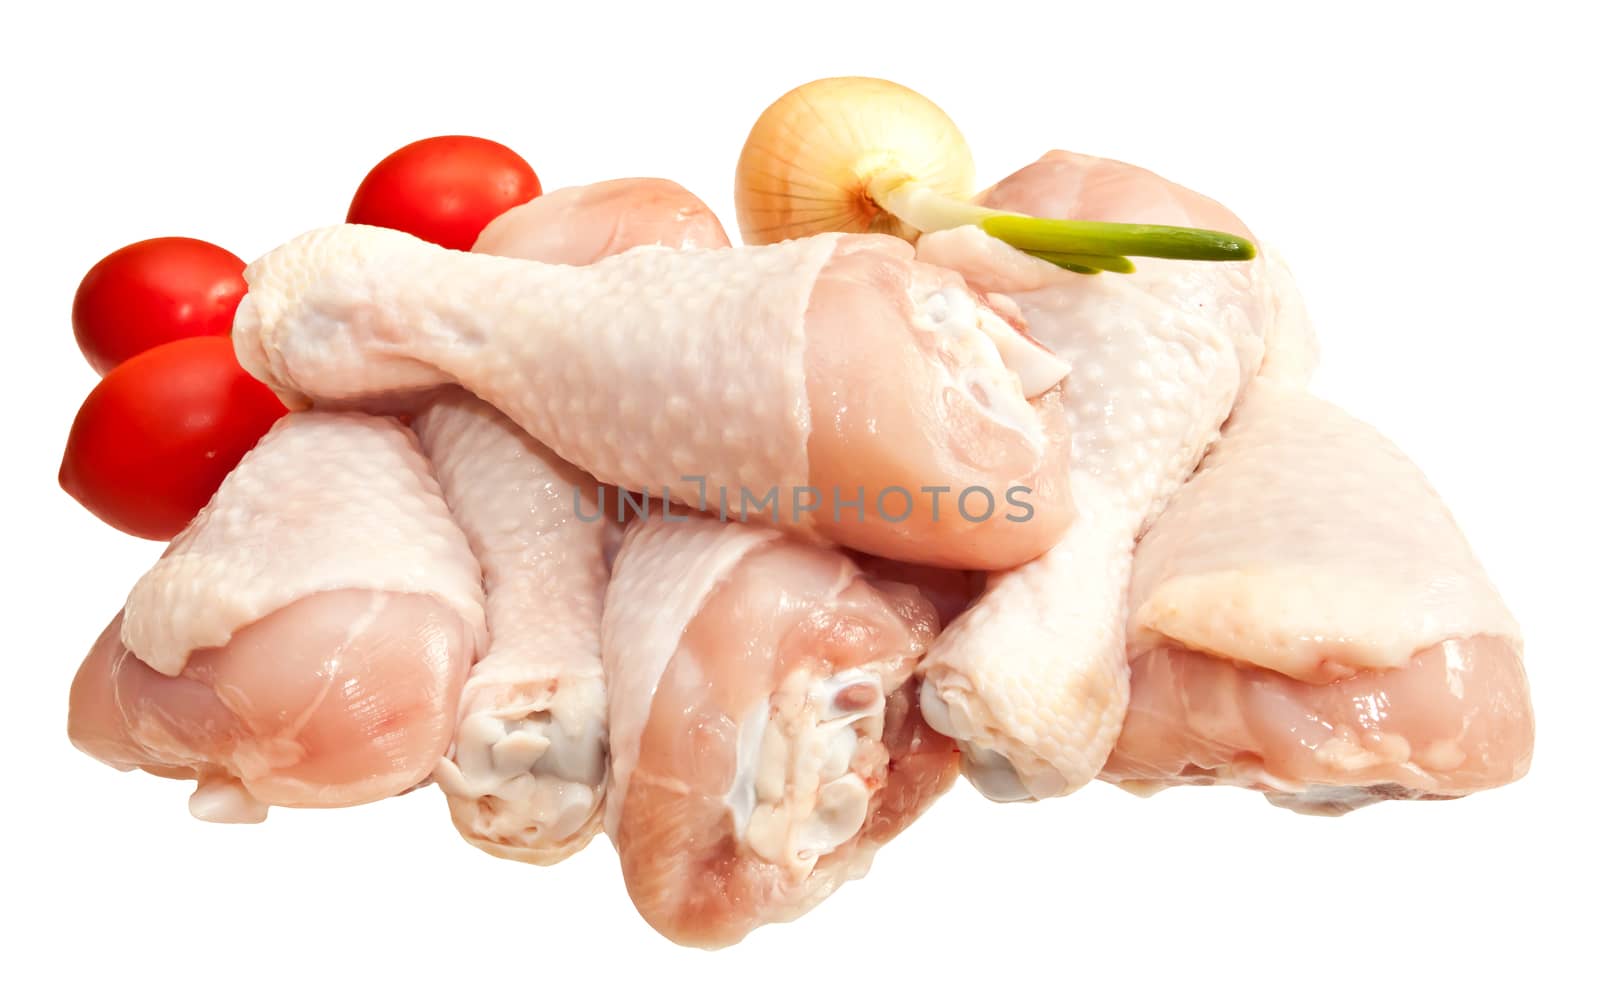 Raw chicken legs with vegetables, isolated on white background by evp82